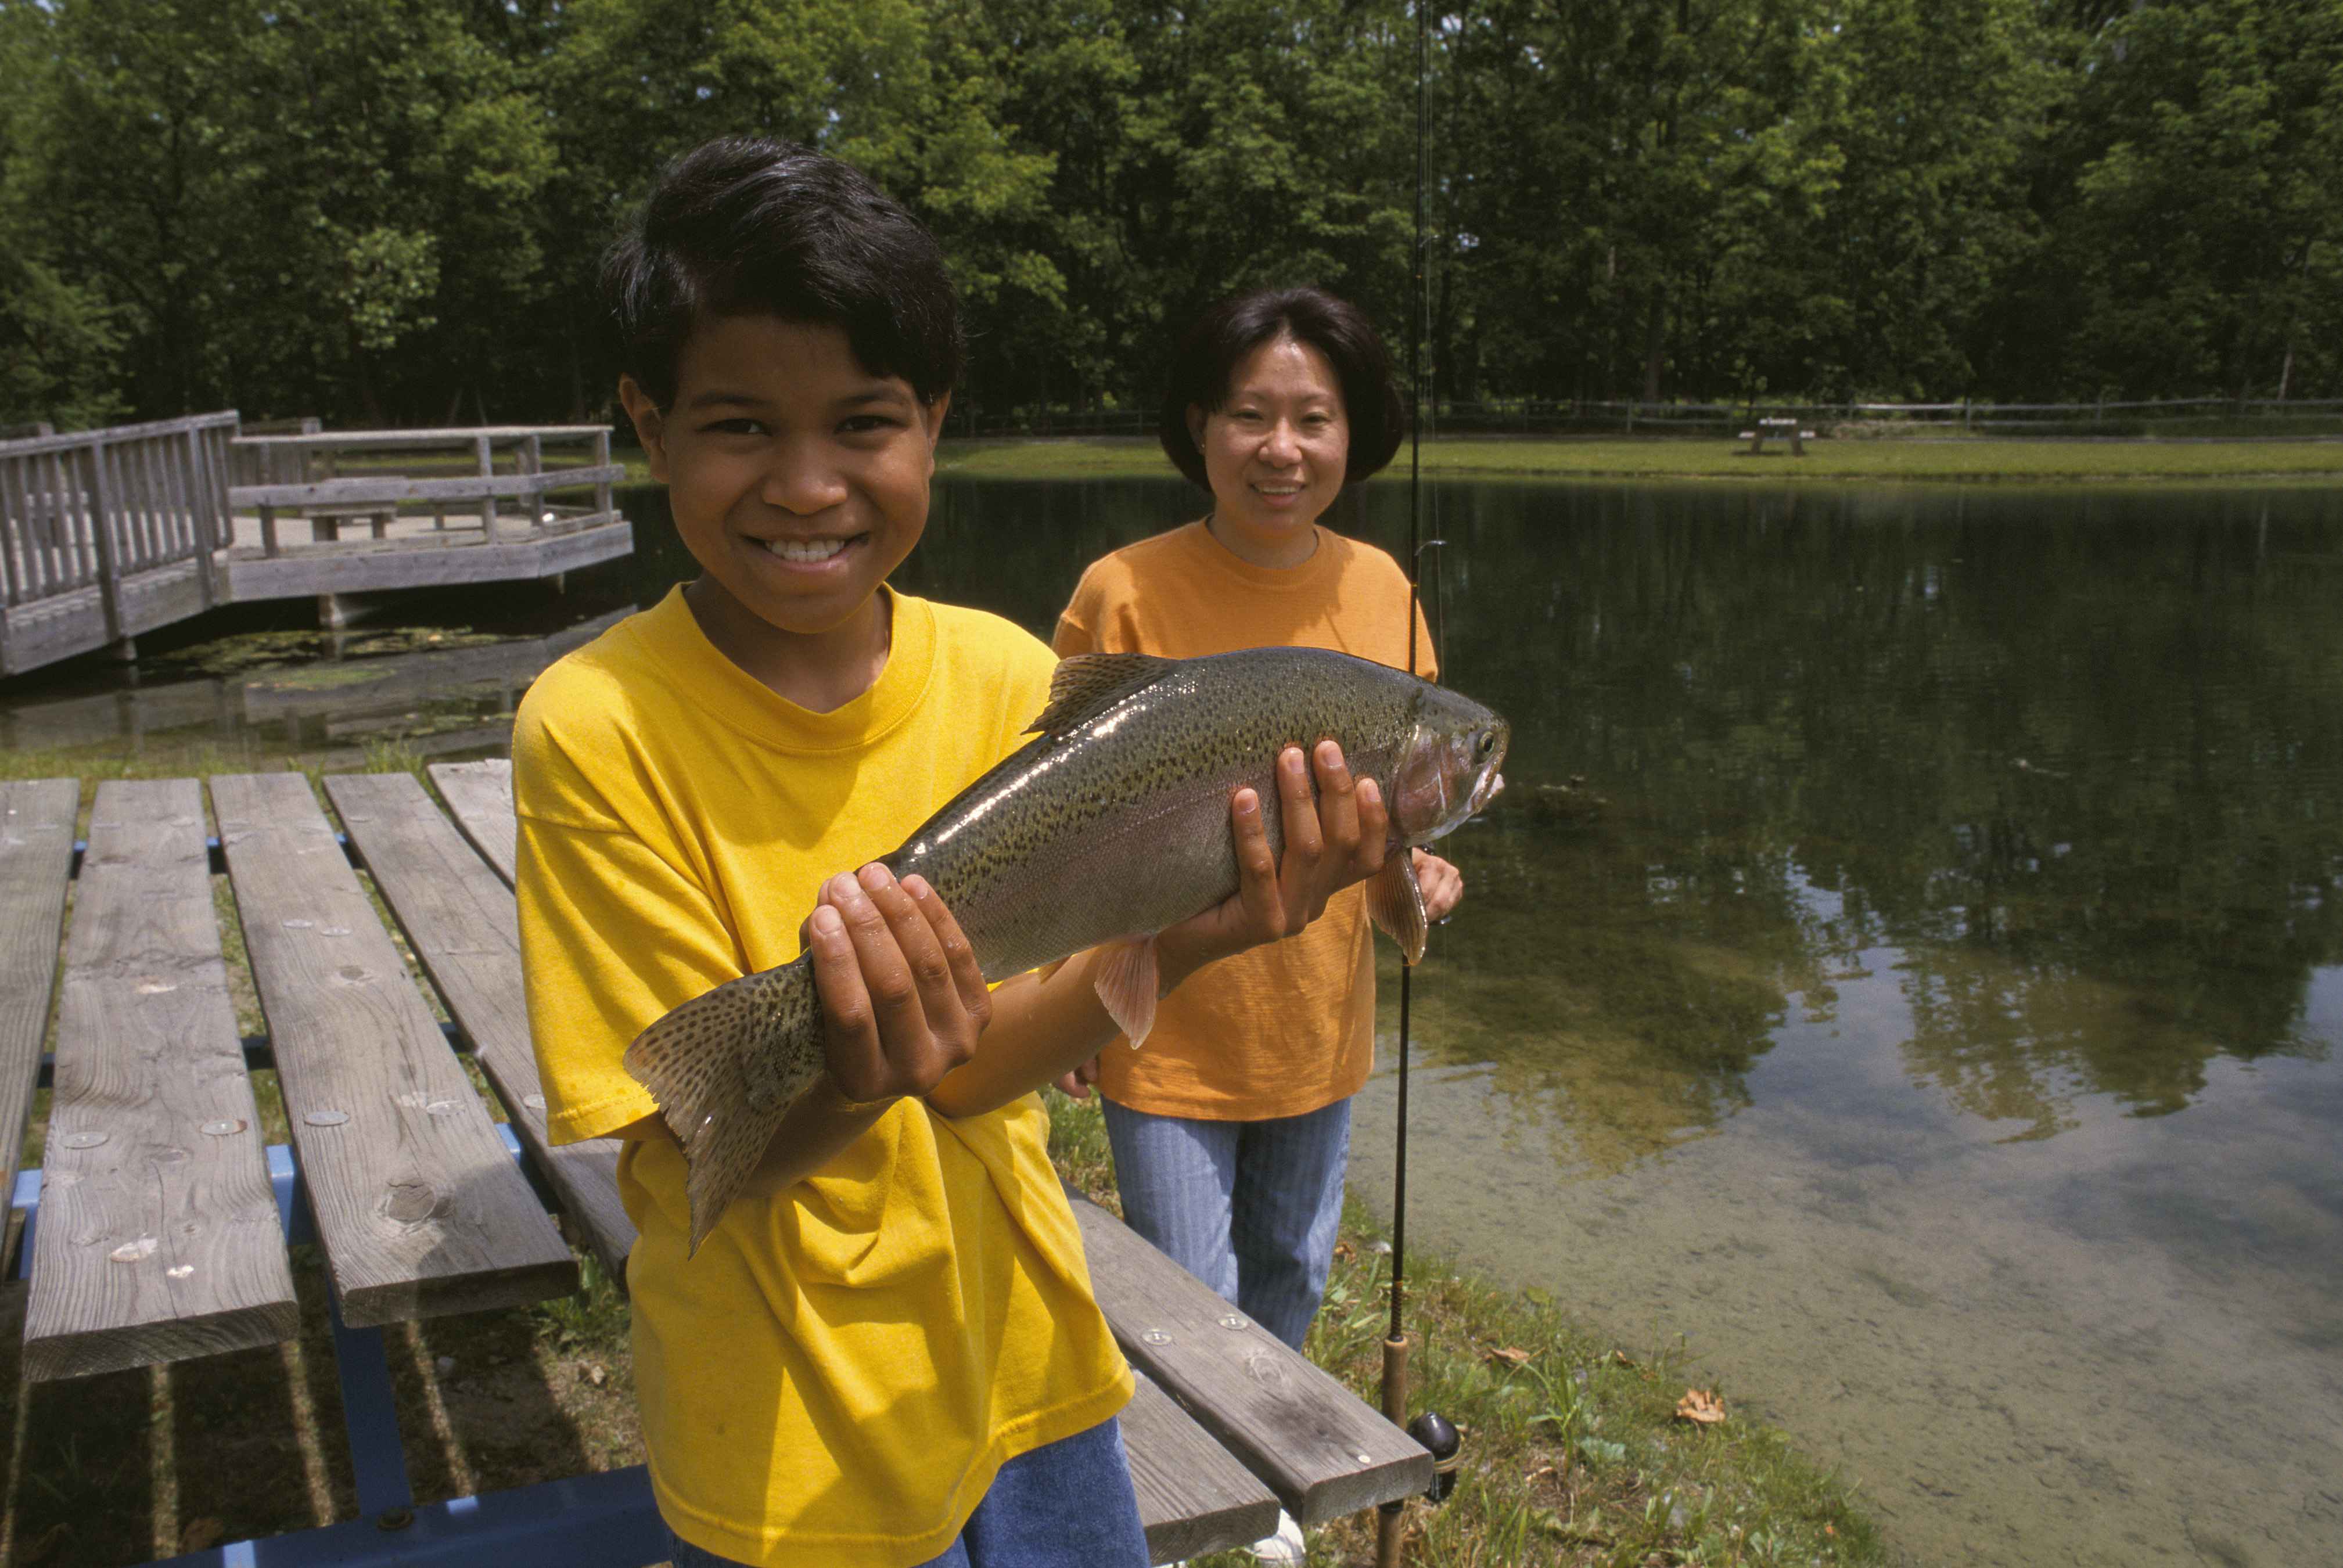 File:Son showing trout fish he caught mother stads proudly behind at  lake.jpg - Wikimedia Commons